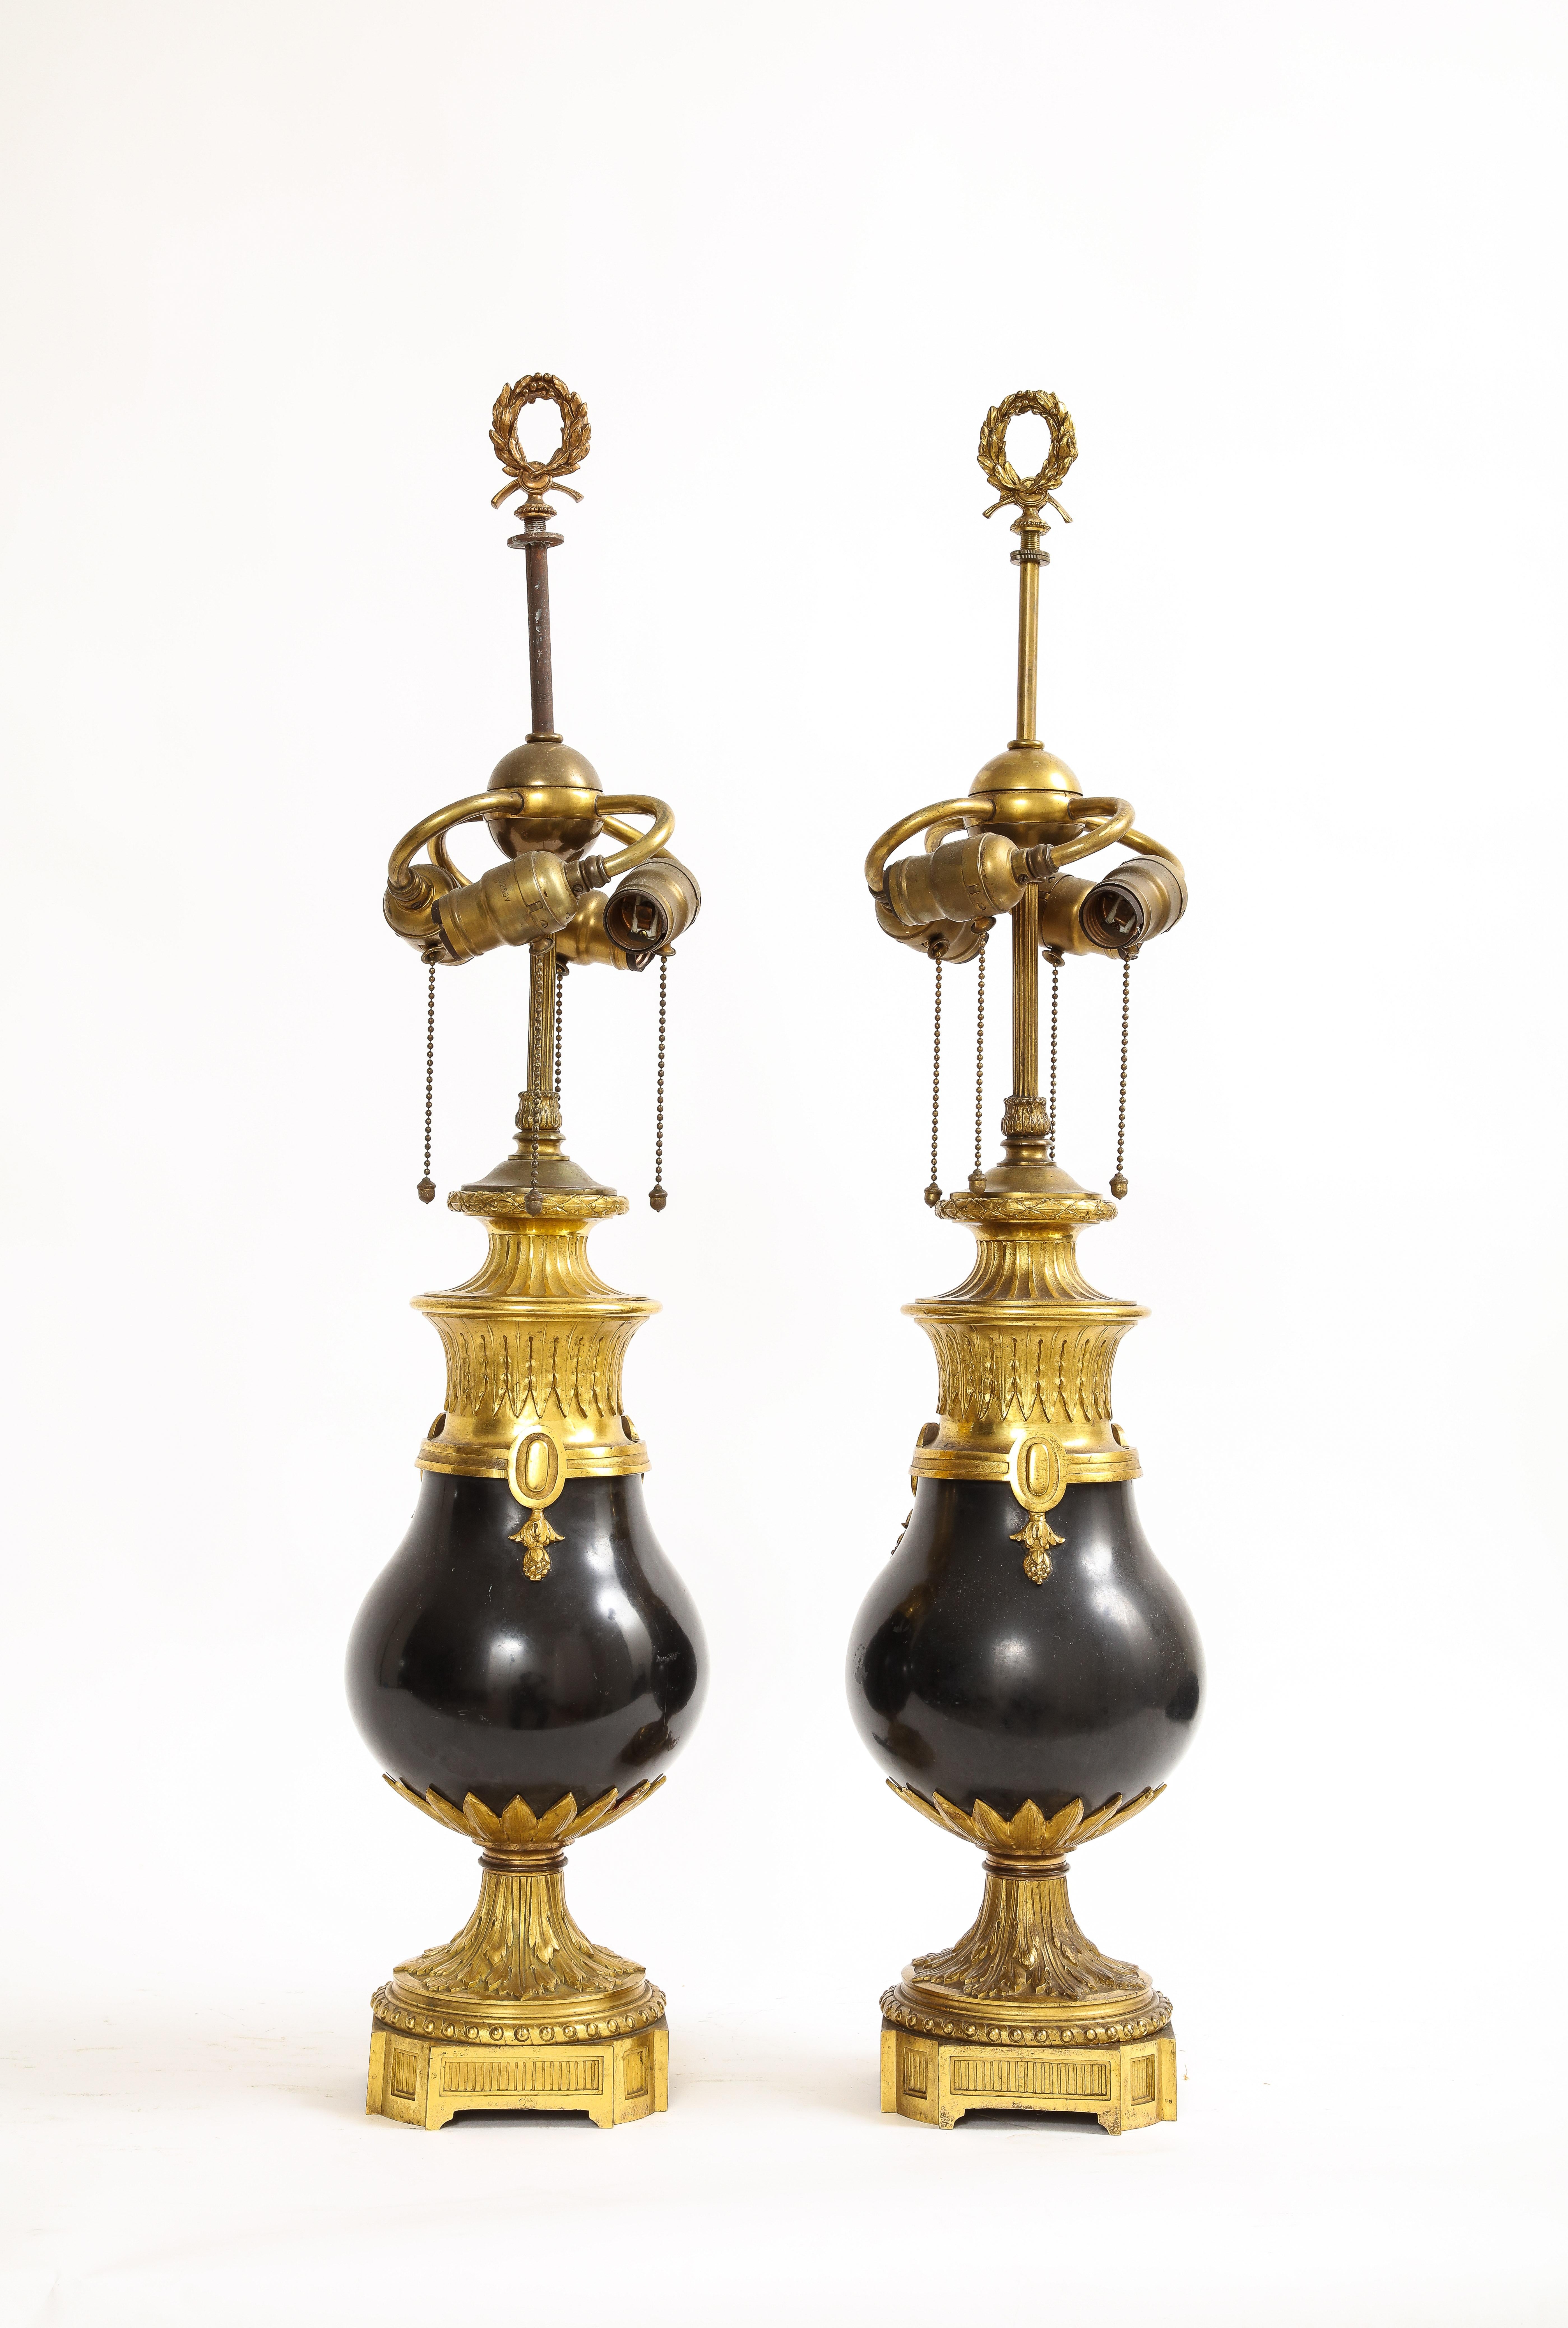 A Pair of Black Marble Ormolu Mounted Caldwell Lamps made in the late 1800s.

An awe-inspiring pair of lamps that harken back to the refined craftsmanship of the 1800s. These exquisite pieces feature black marble, meticulously shaped to resemble